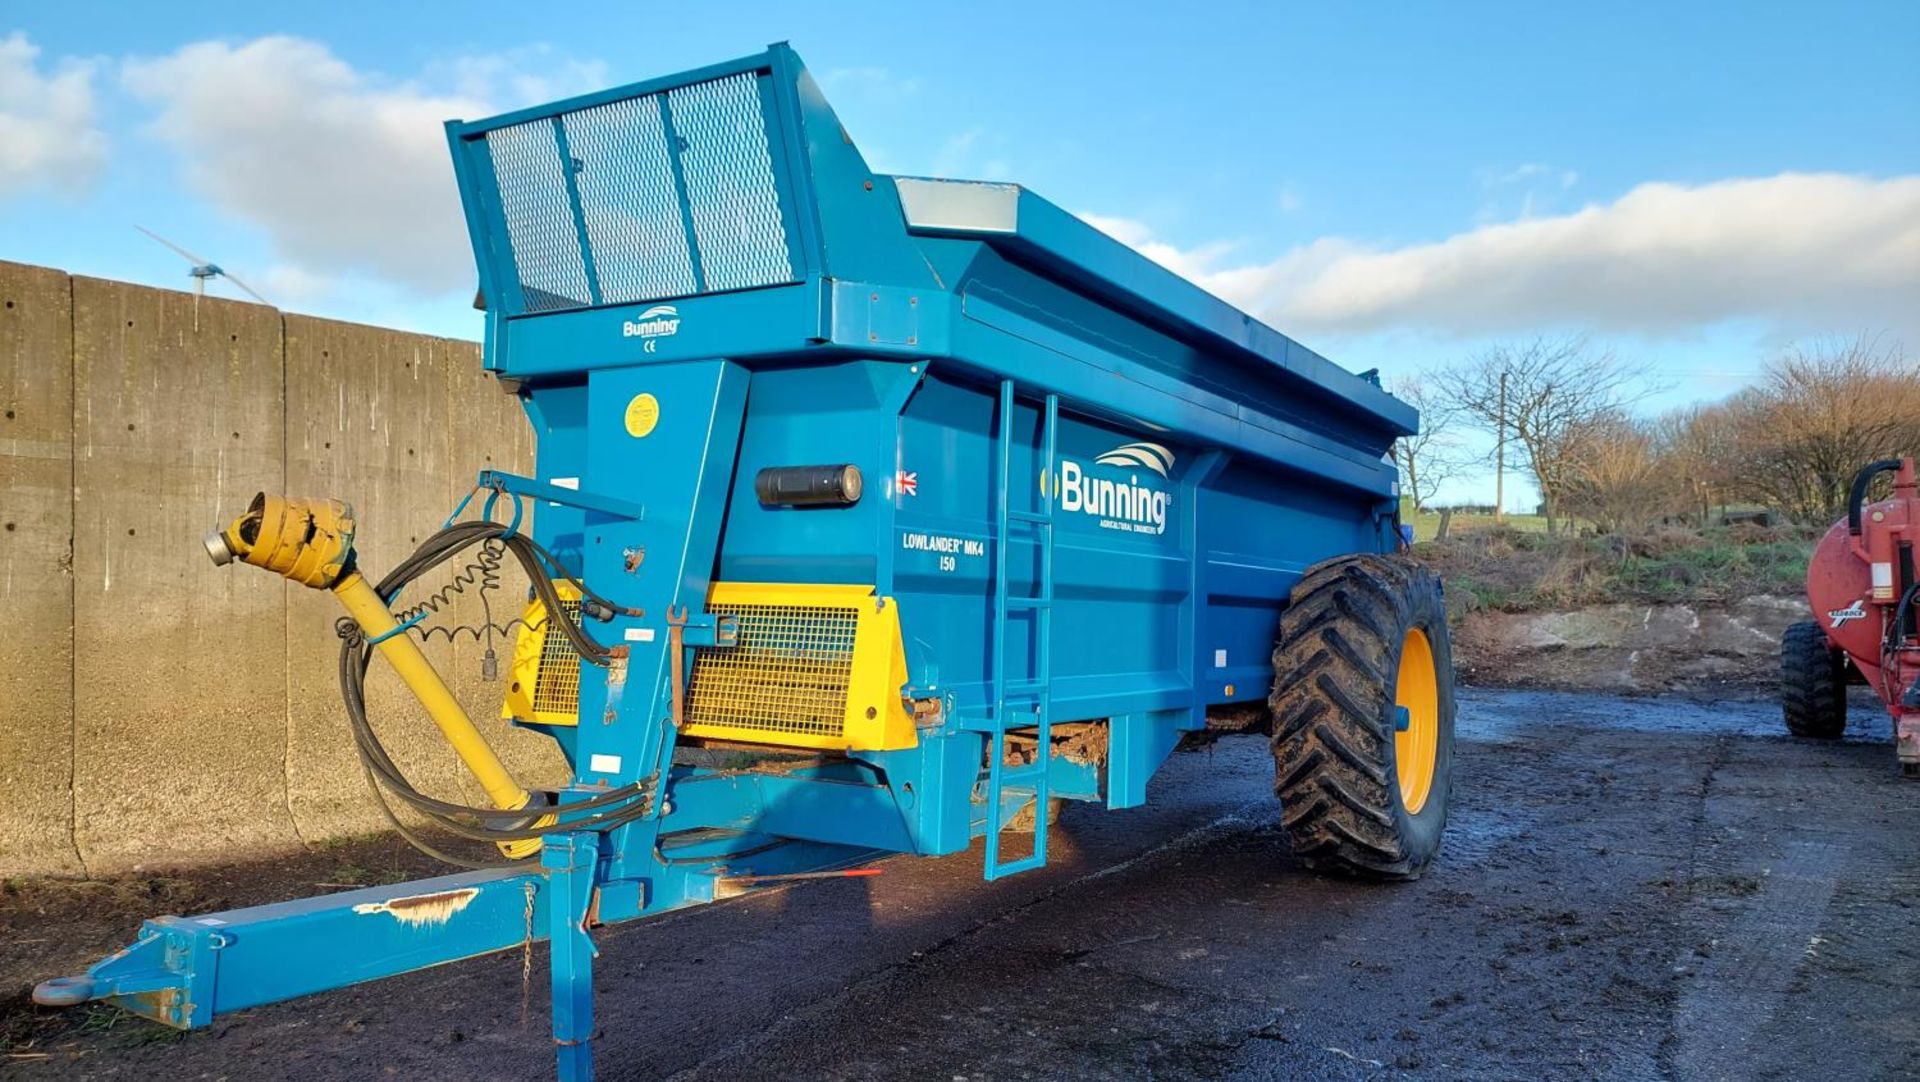 Bunnings Lowlander 150 MH4 Muck Spreader comes with greedy sides (2016)